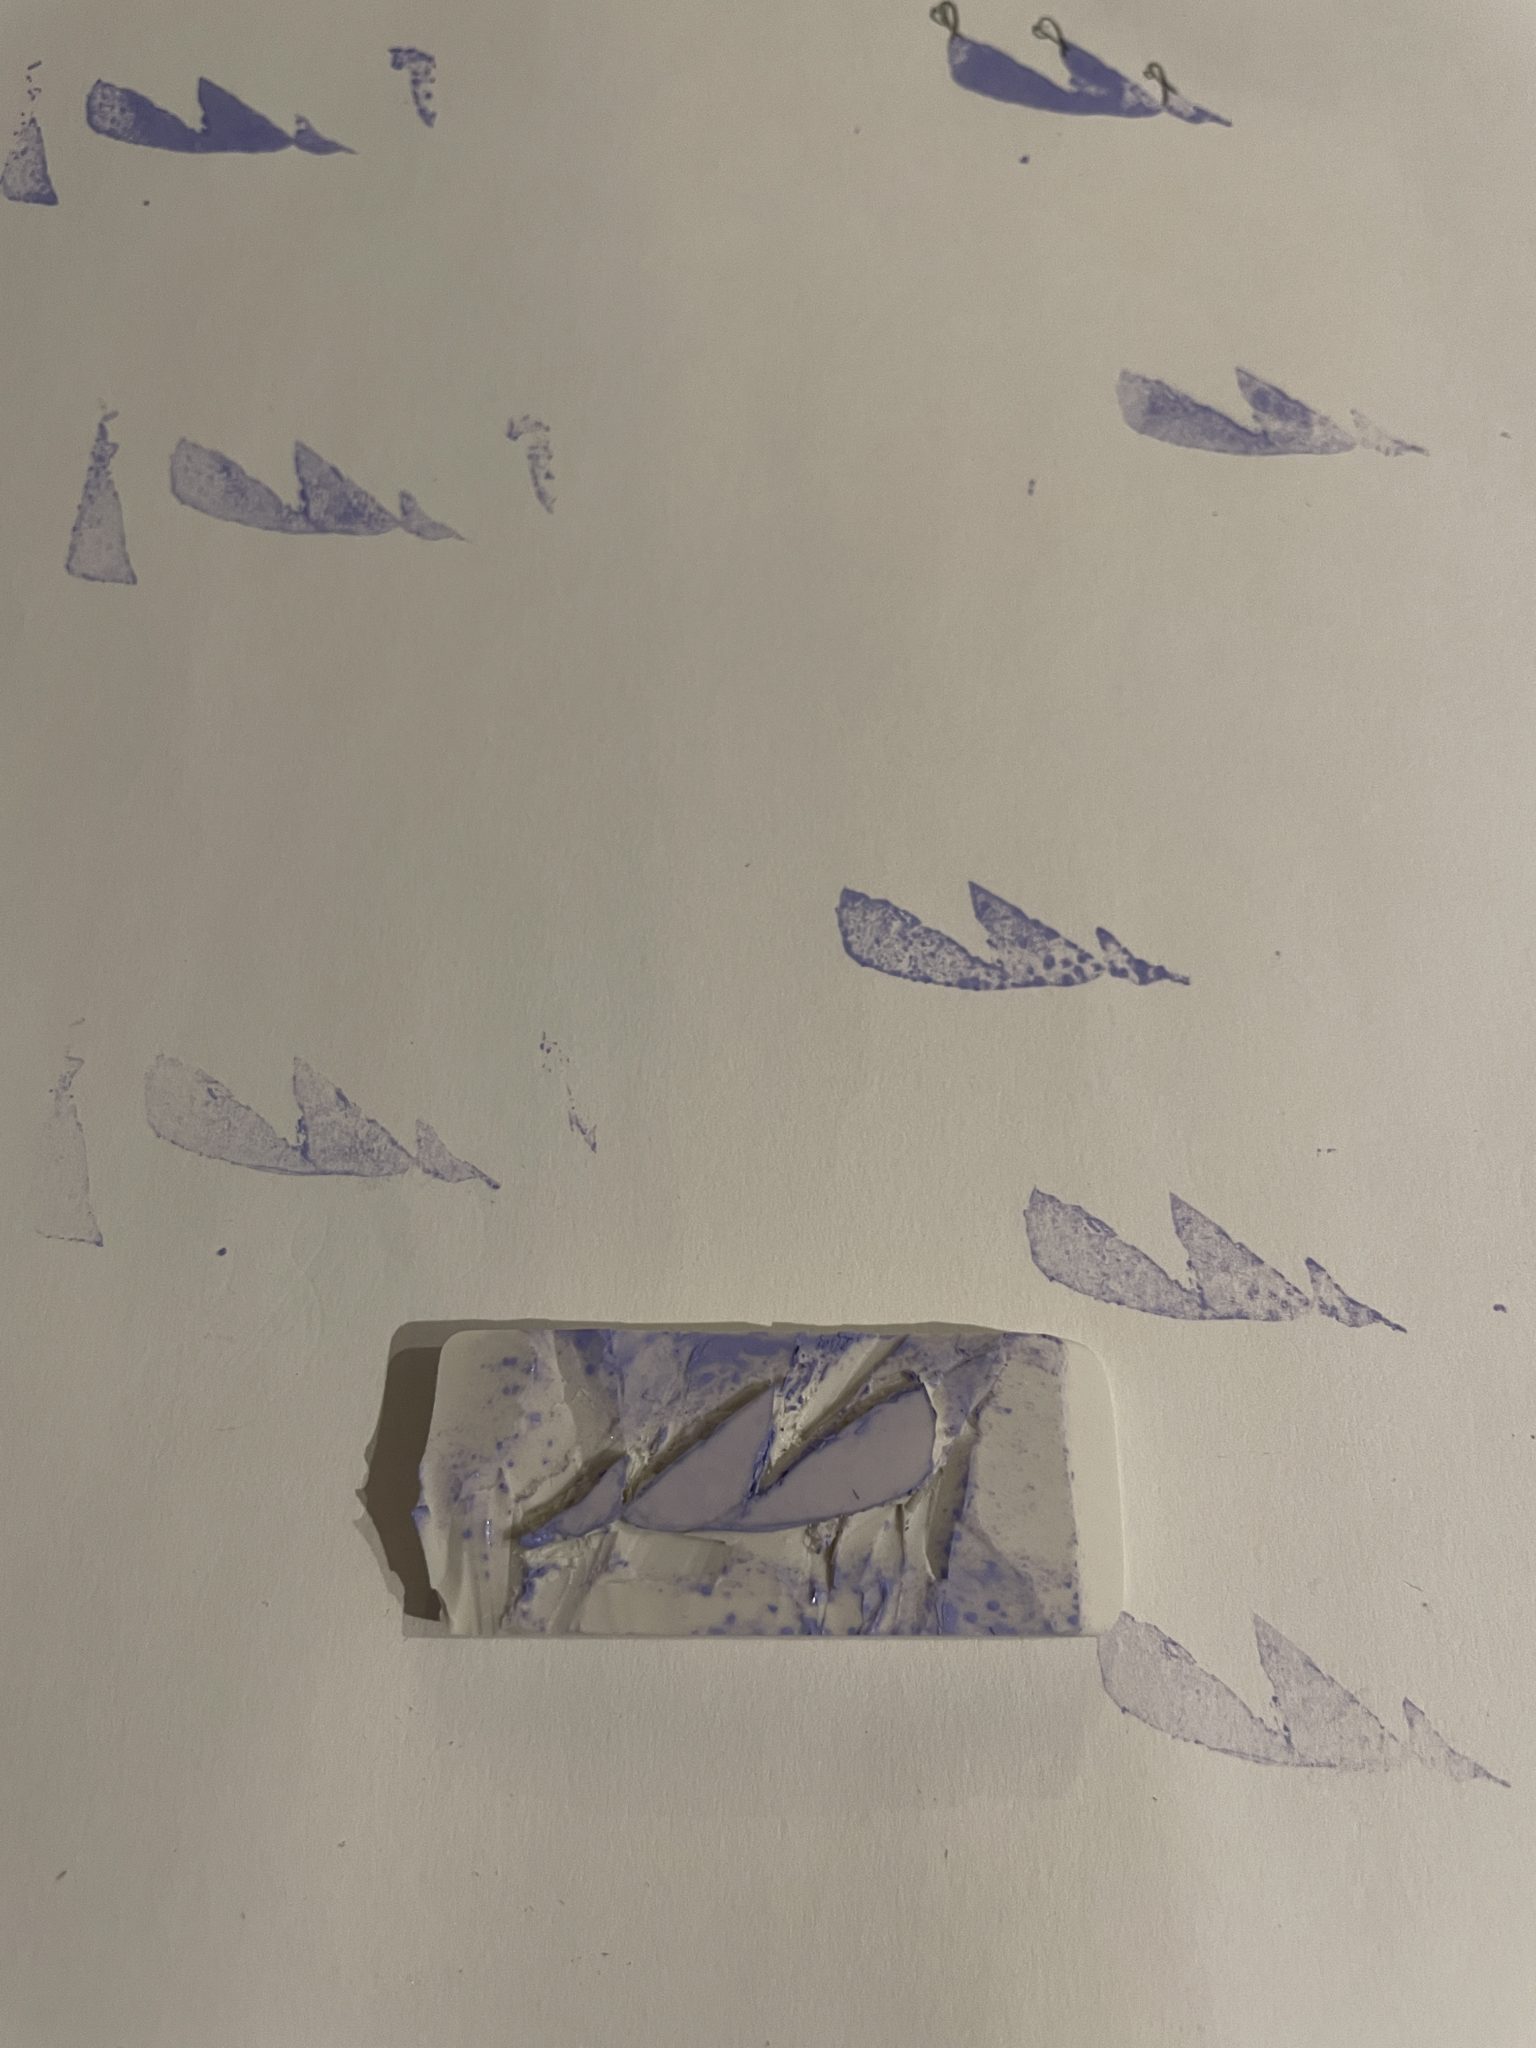 A white eraser carved with an curved abstract design, suggestive of three leaves, waves, sails, or goose bodies connected to one another. The carved eraser stamp sits on top of a white piece of paper, and the abstract design is stamped in lilac ink all over the page.